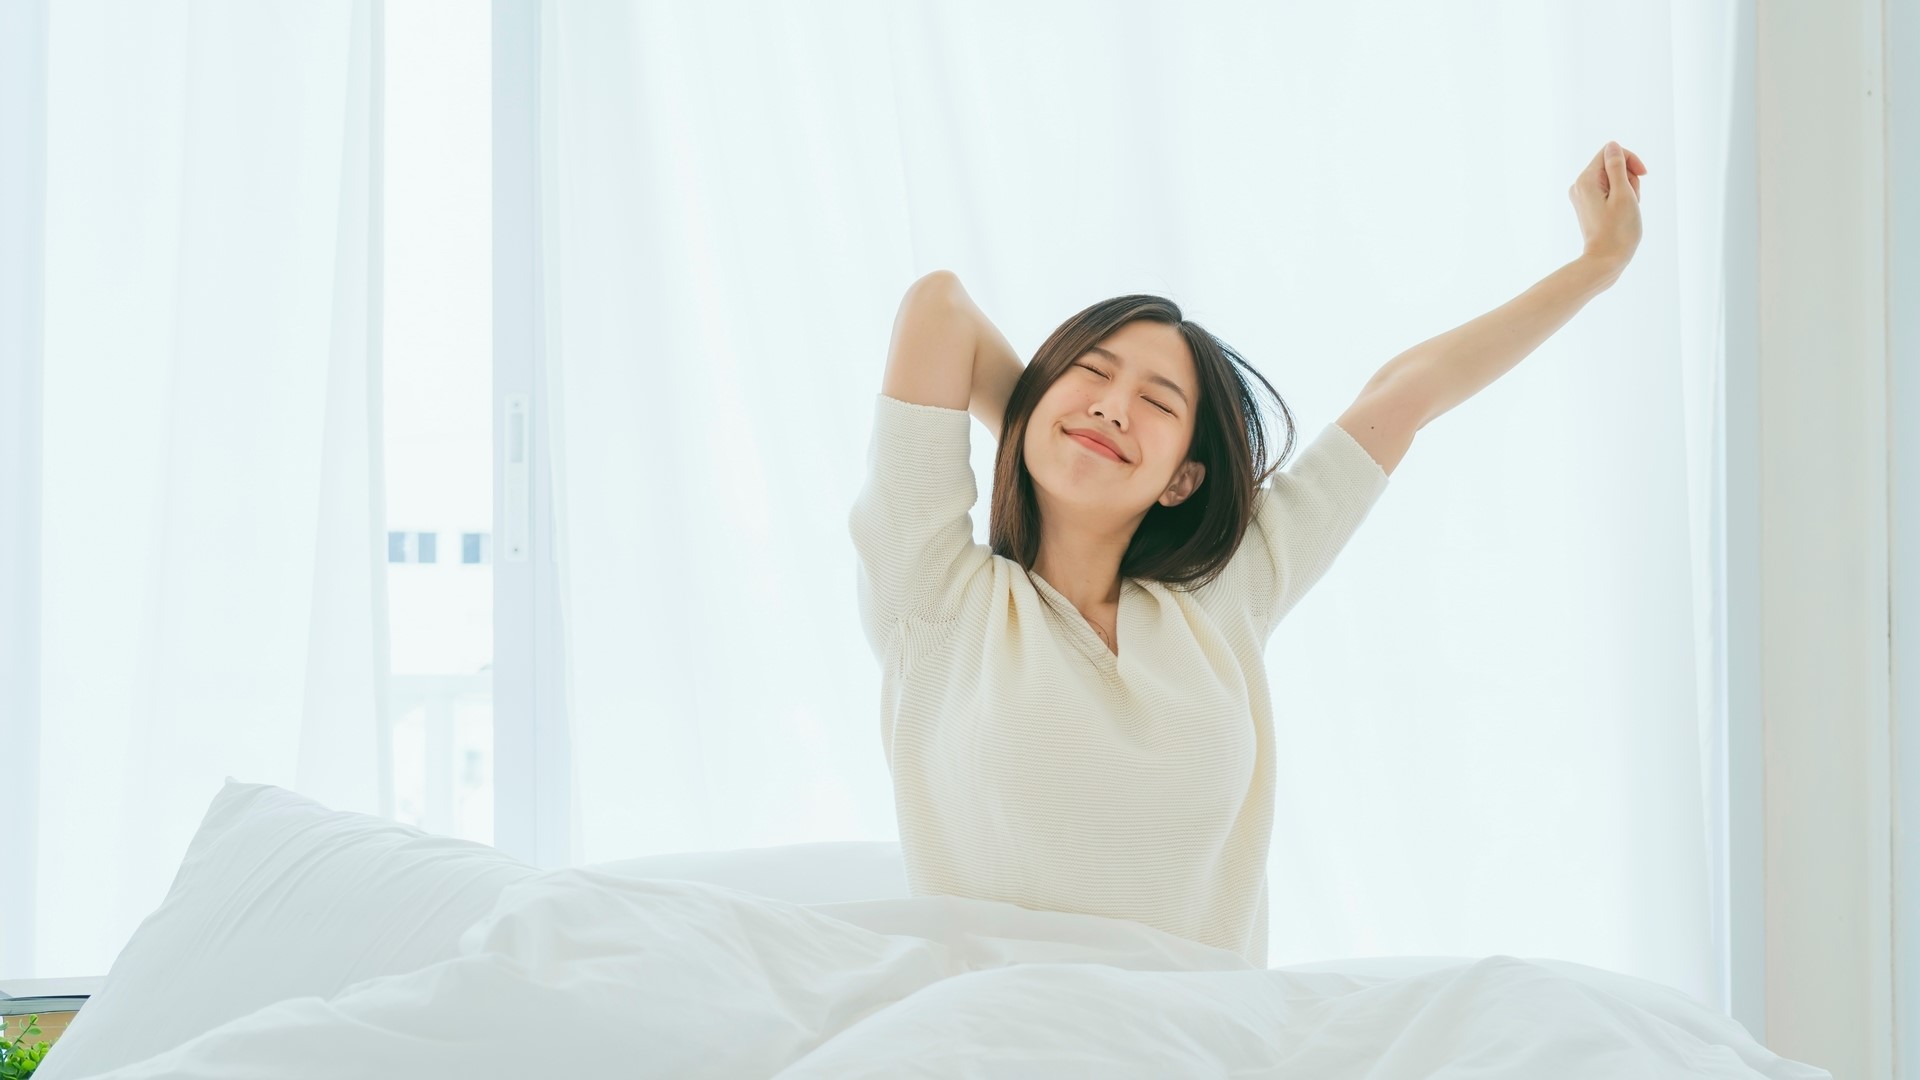 Stick to the 4 principles to have a good night's SLEEP